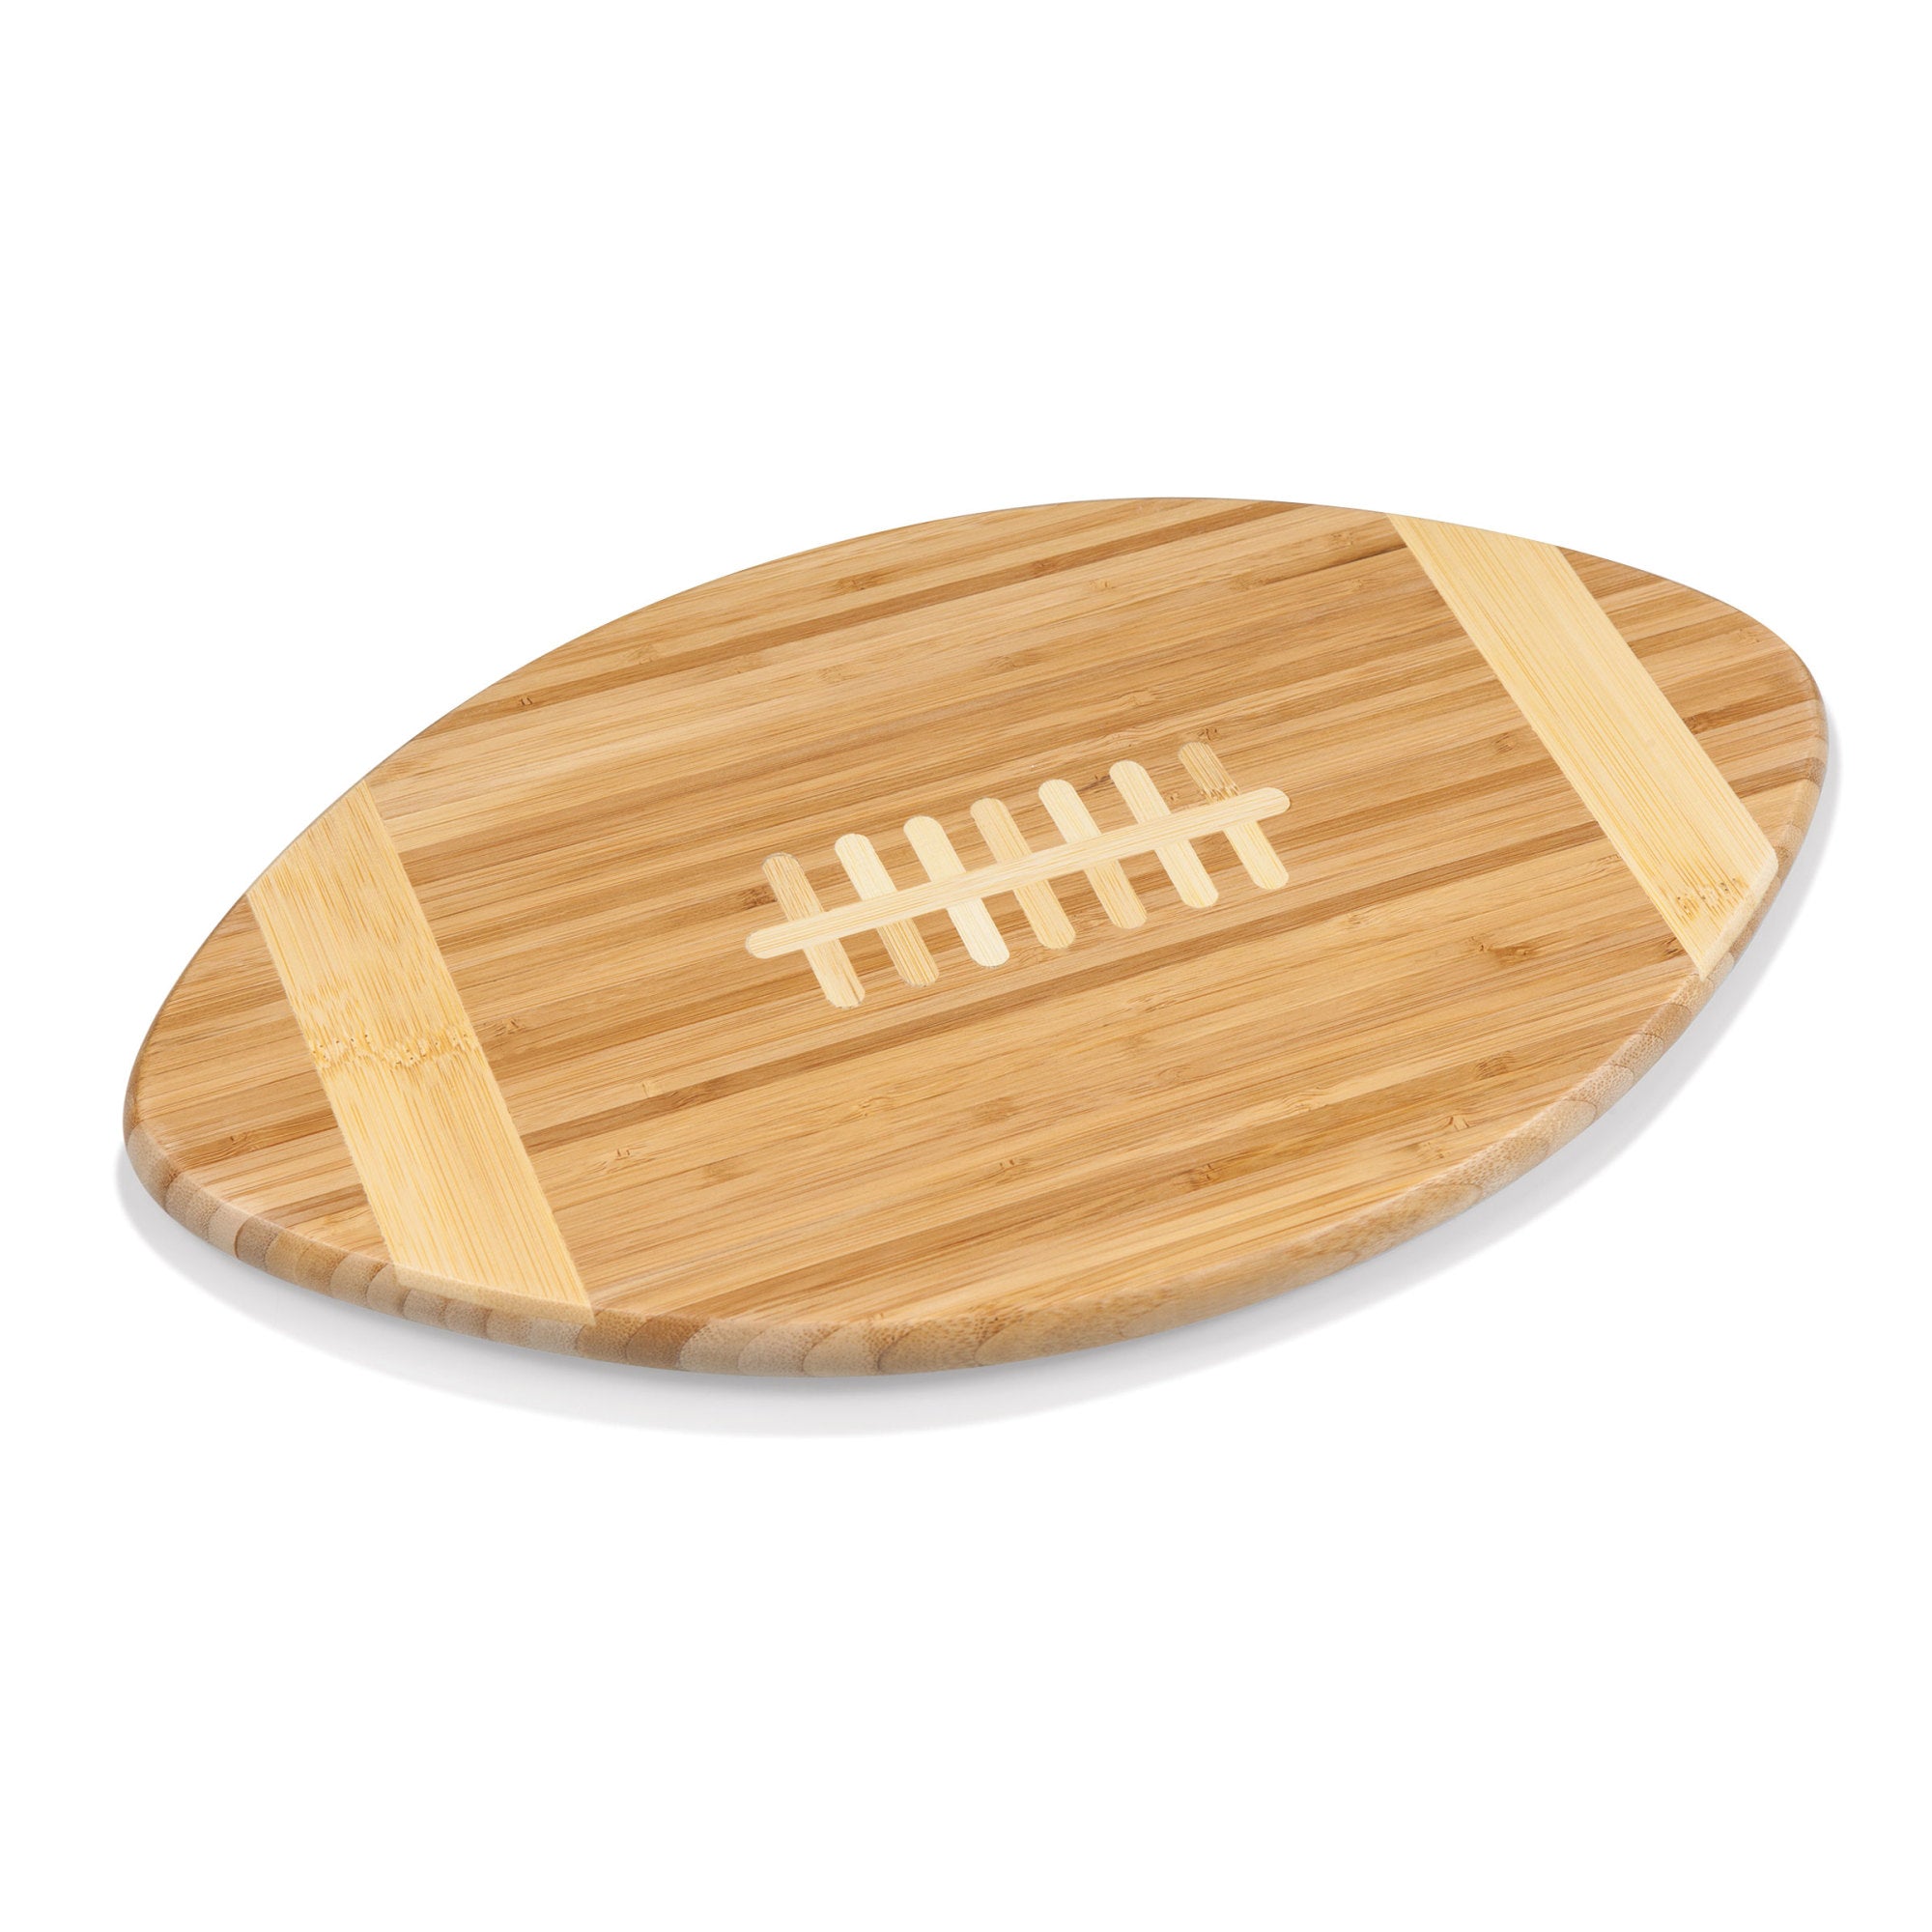 Florida State Seminoles - Touchdown! Football Cutting Board & Serving Tray